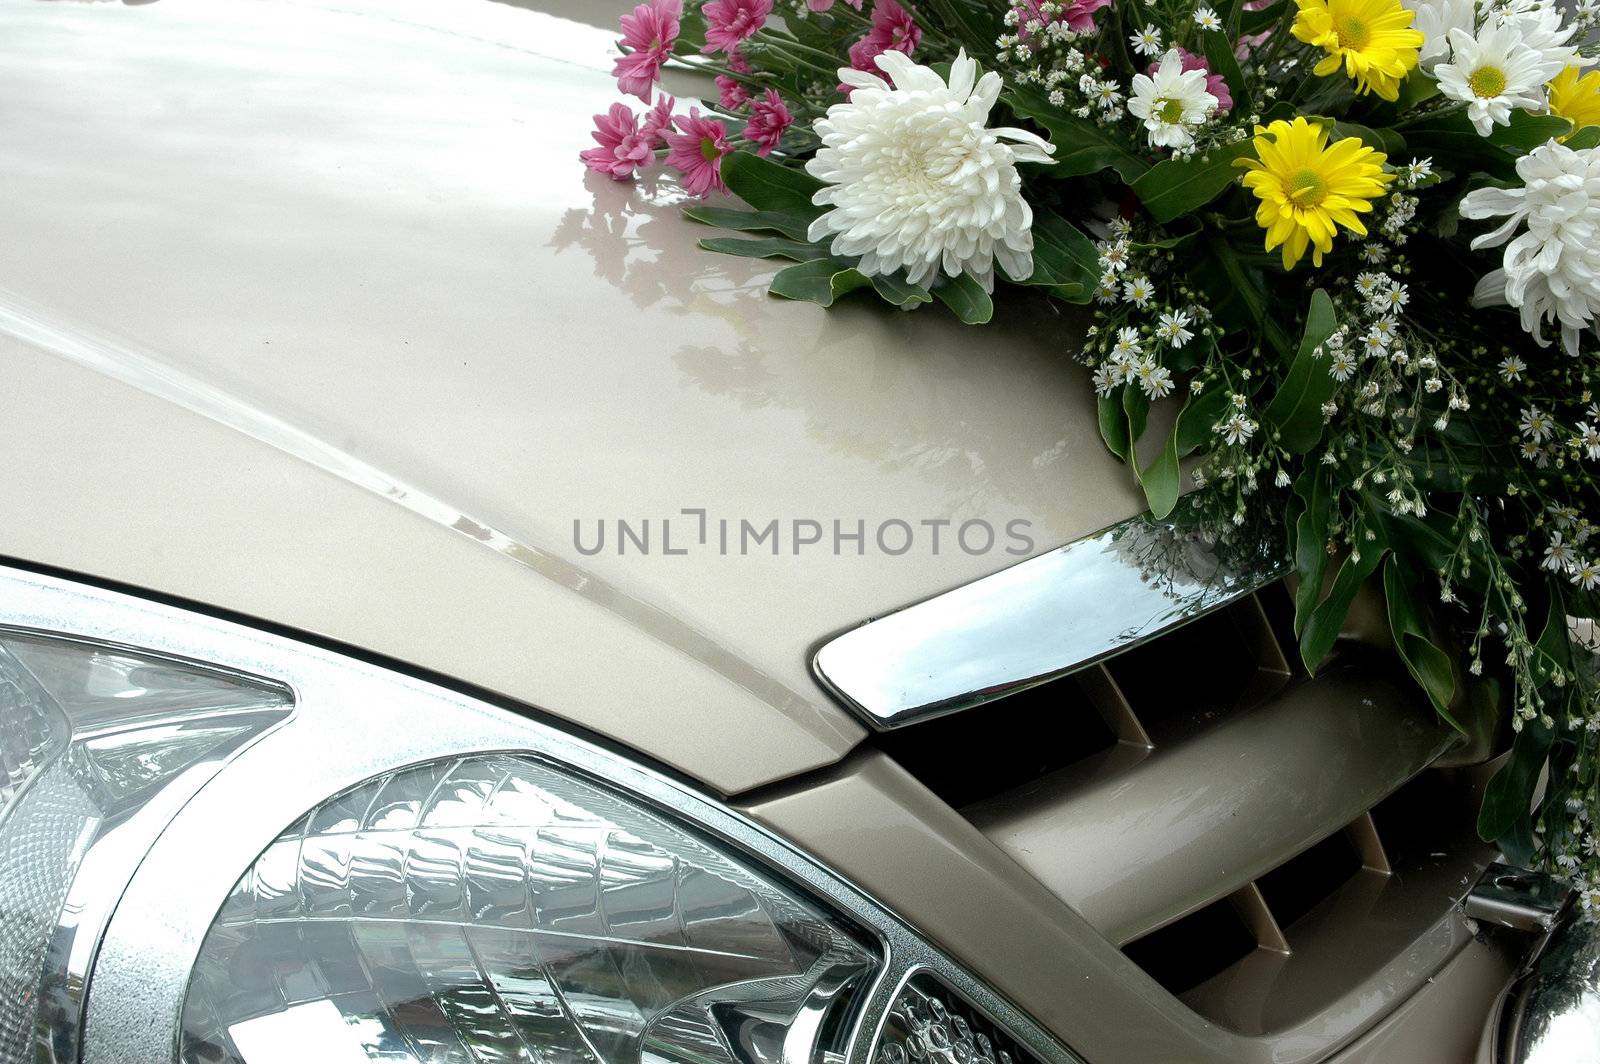 series of colorful fresh flowers on the wedding car by antonihalim